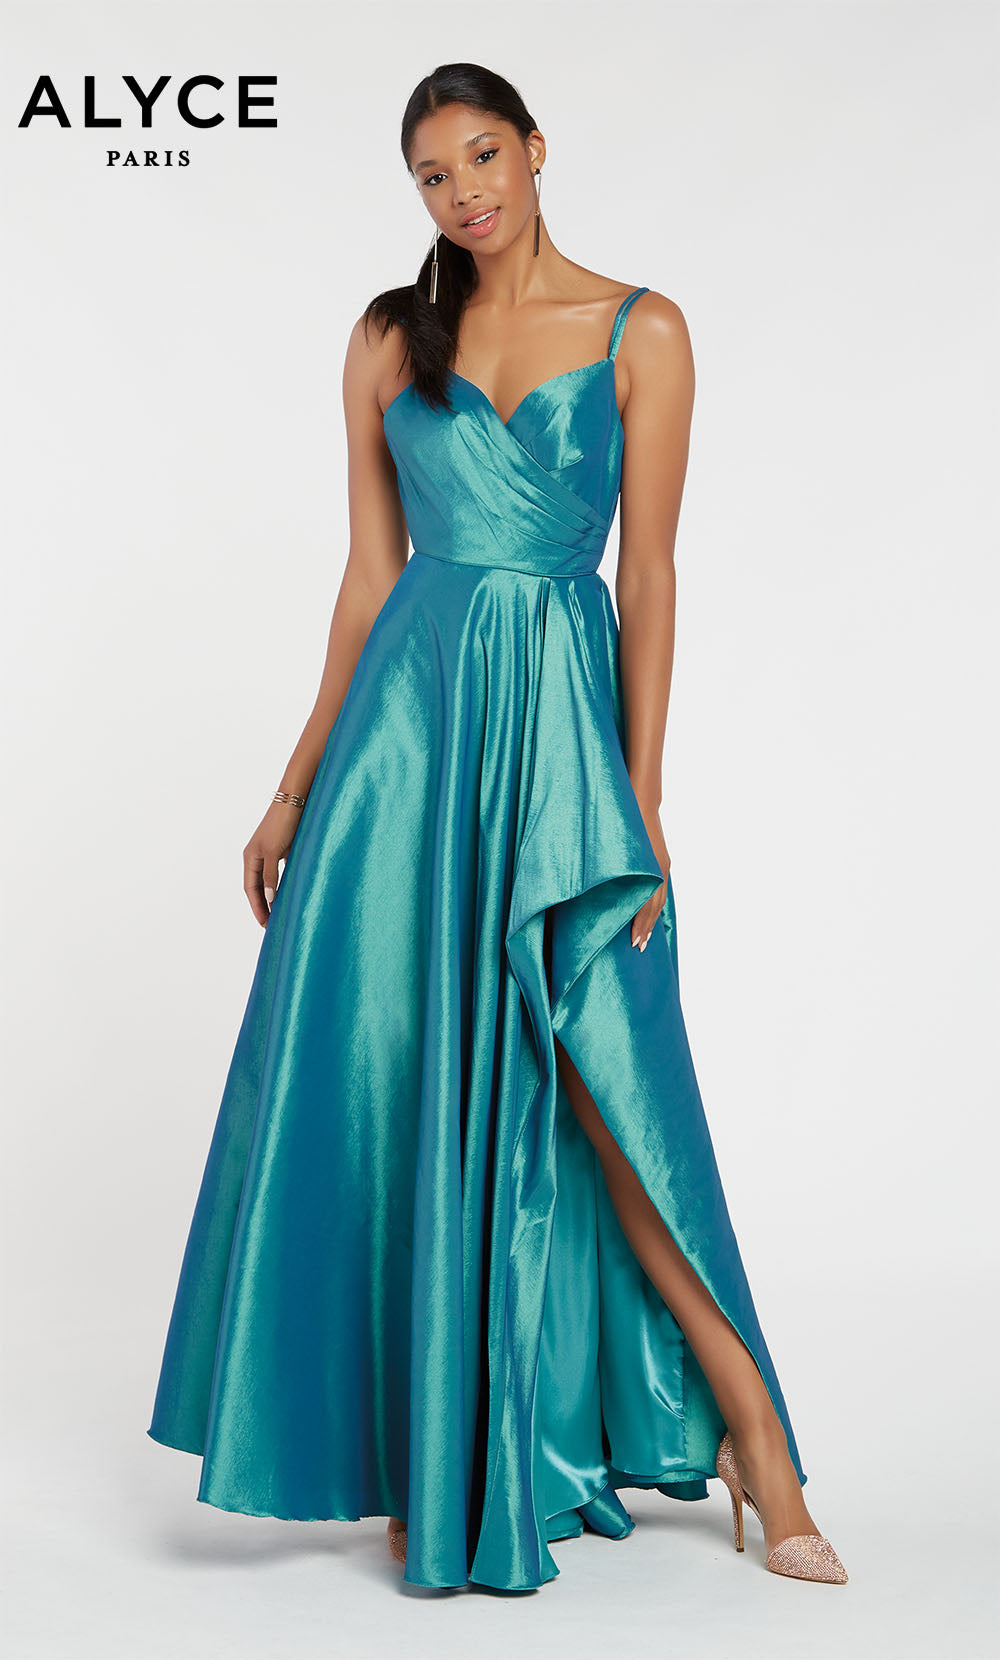 TEAL PROM 2024 EVENING PAGEANT FORMAL BALL GALA DRESS WEDDING GOWN XS 2/4 |  eBay